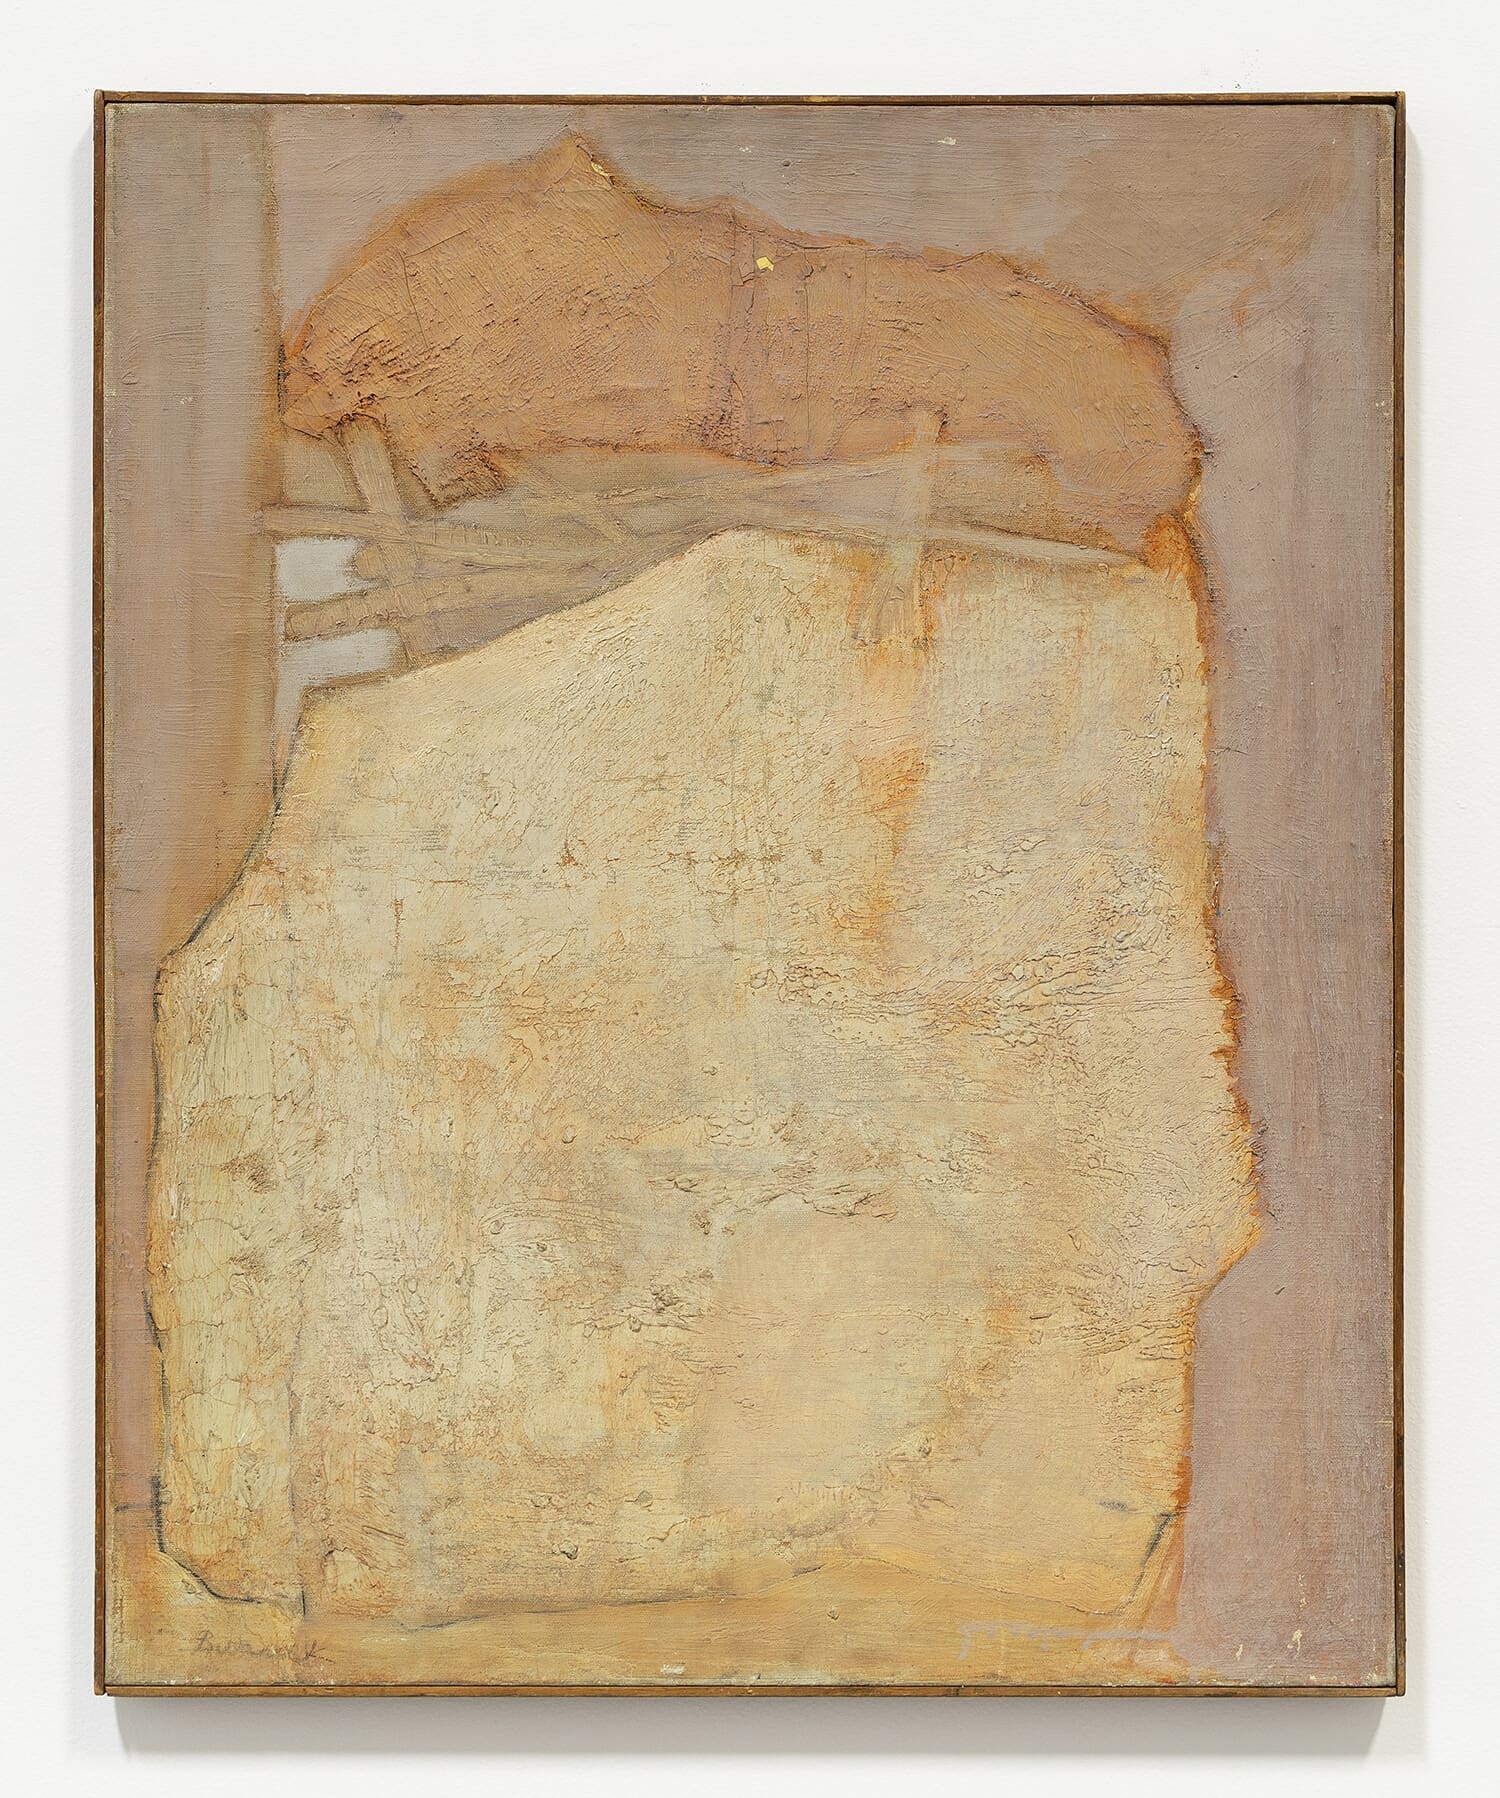 Rudolf Baranik Flame and Rock, c. 1951 Paint on canvas 30 x 24 1/4 inches (76.2 x 61.6 cm)